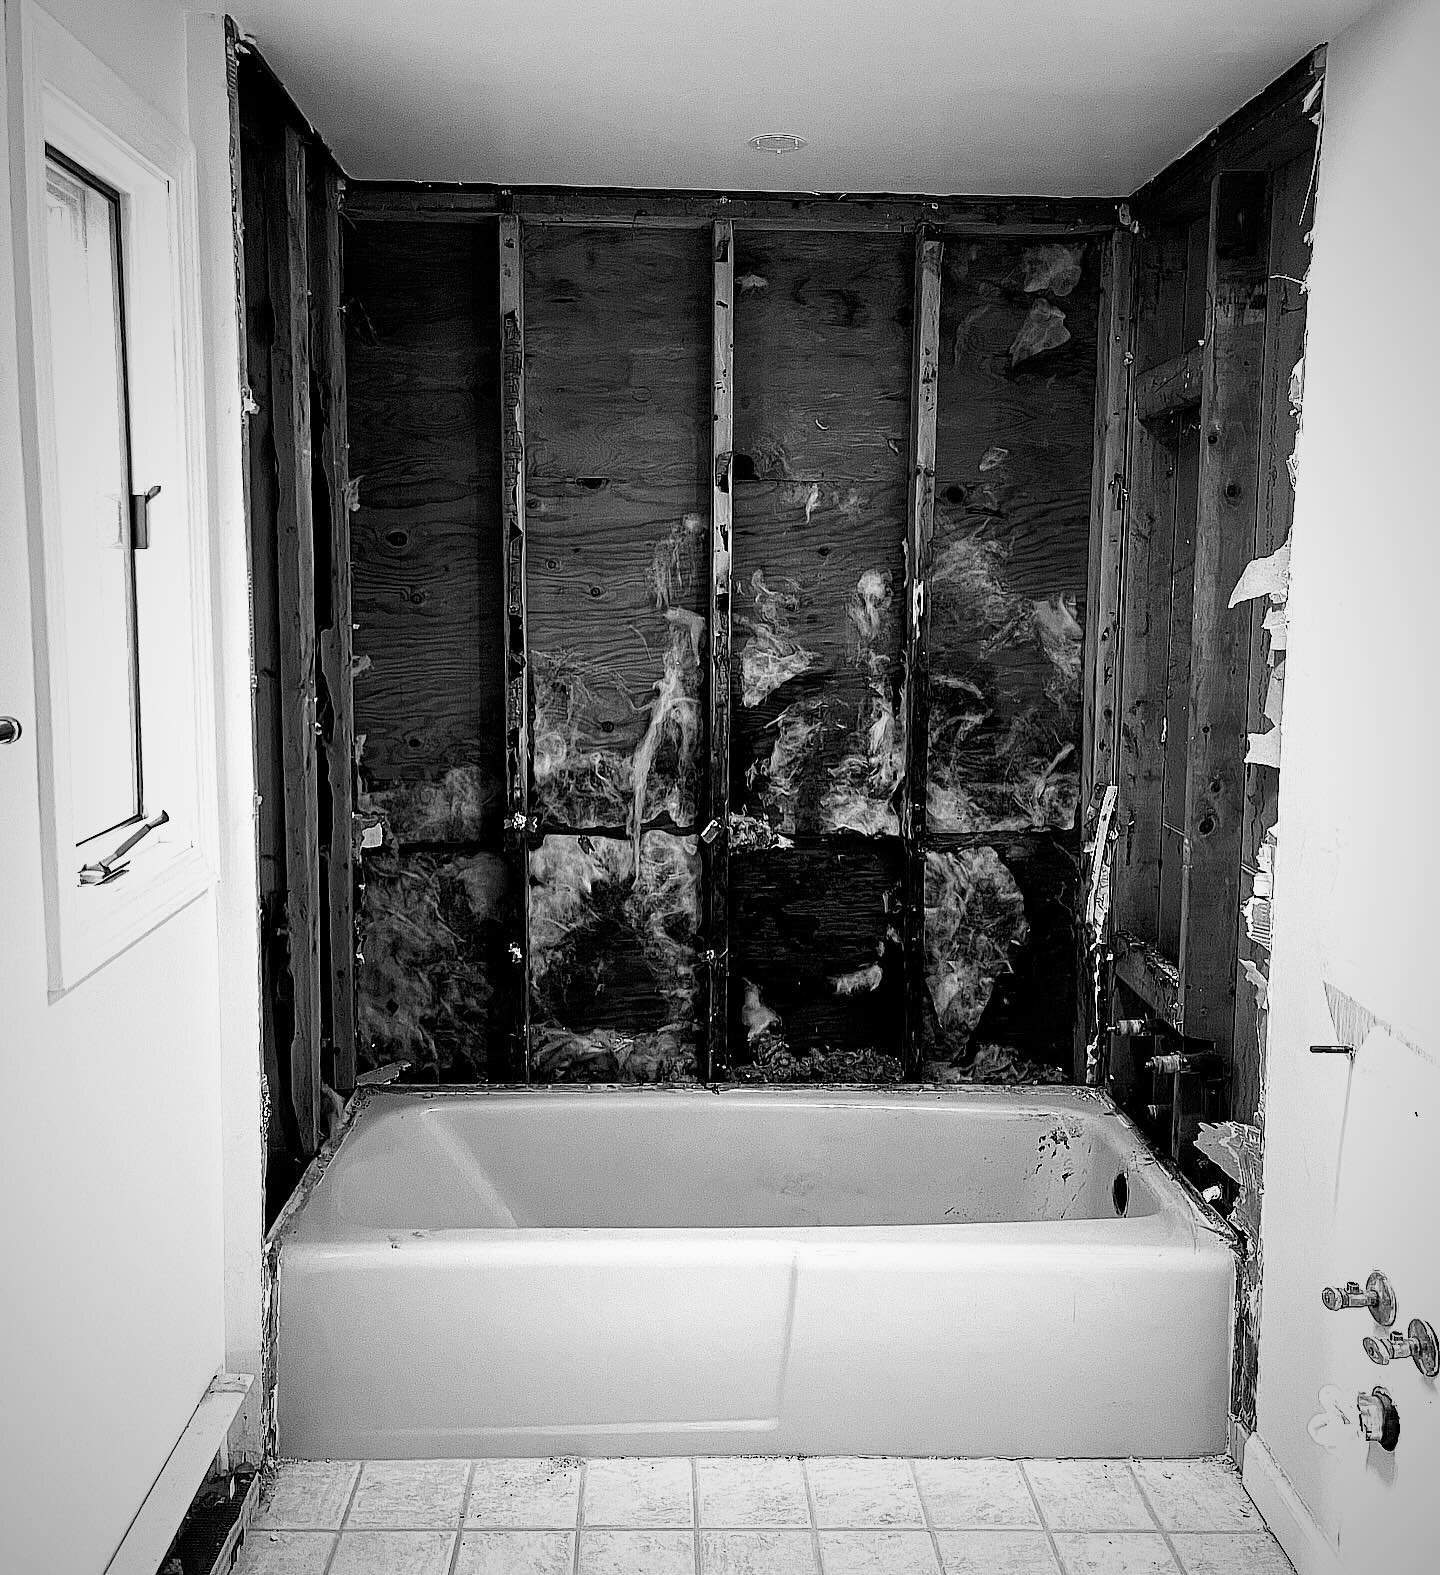 Good start to a small bathroom renovation. The tiles around the tub had been glued directly to the gypsum board without any waterproofing membrane of any kind. Consequently, the studs along the wall rotted because they regularly got wet but could nev